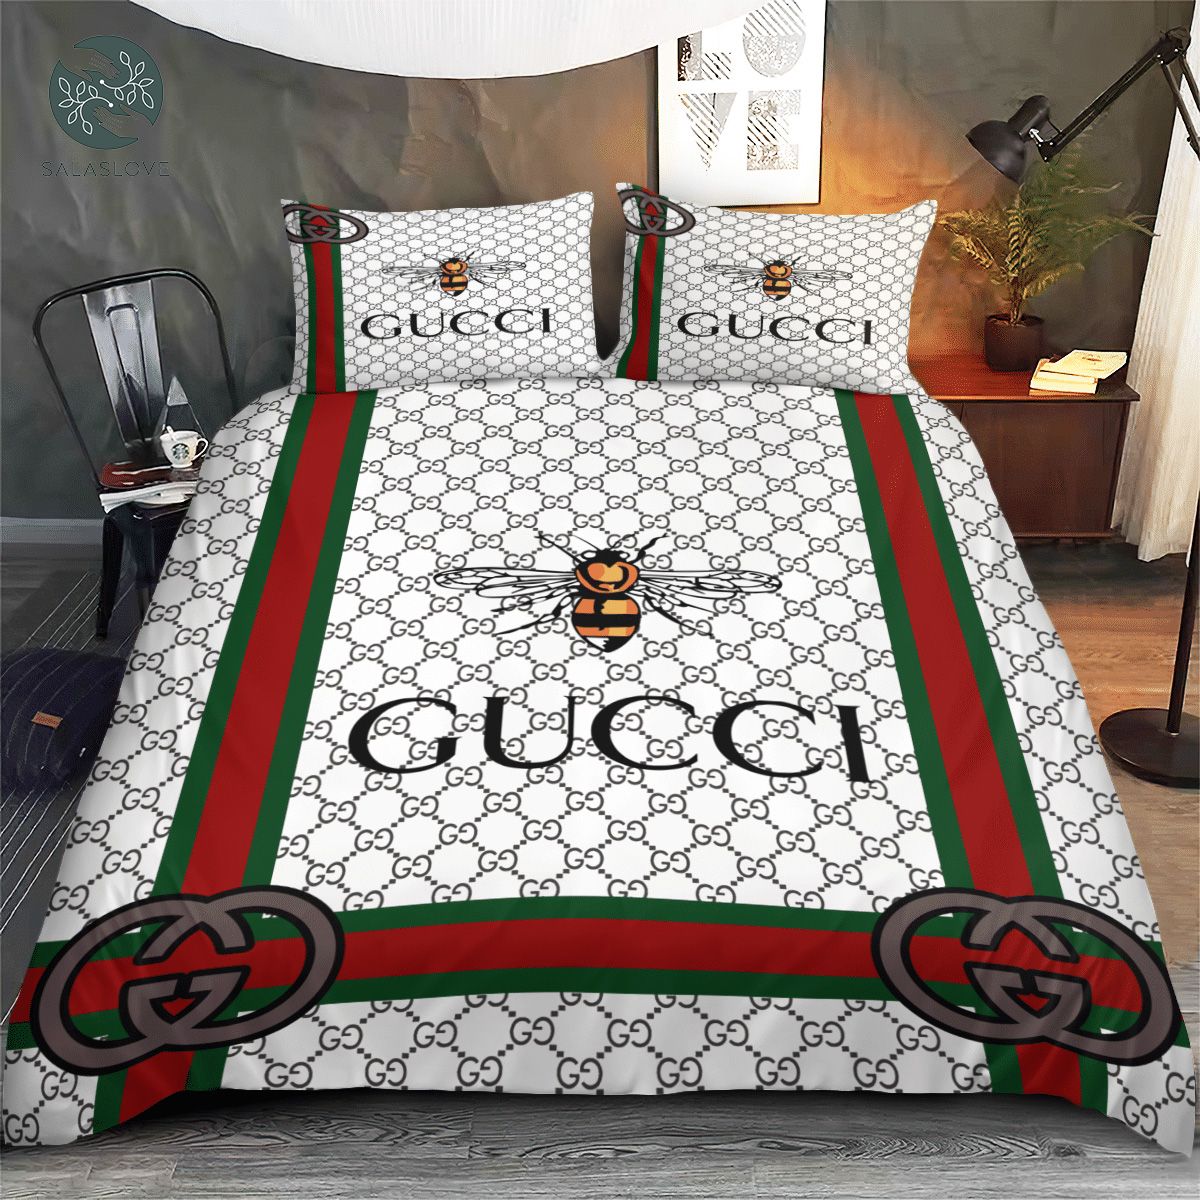 Gucci Bee Italian High-end Brand Bedding Sets